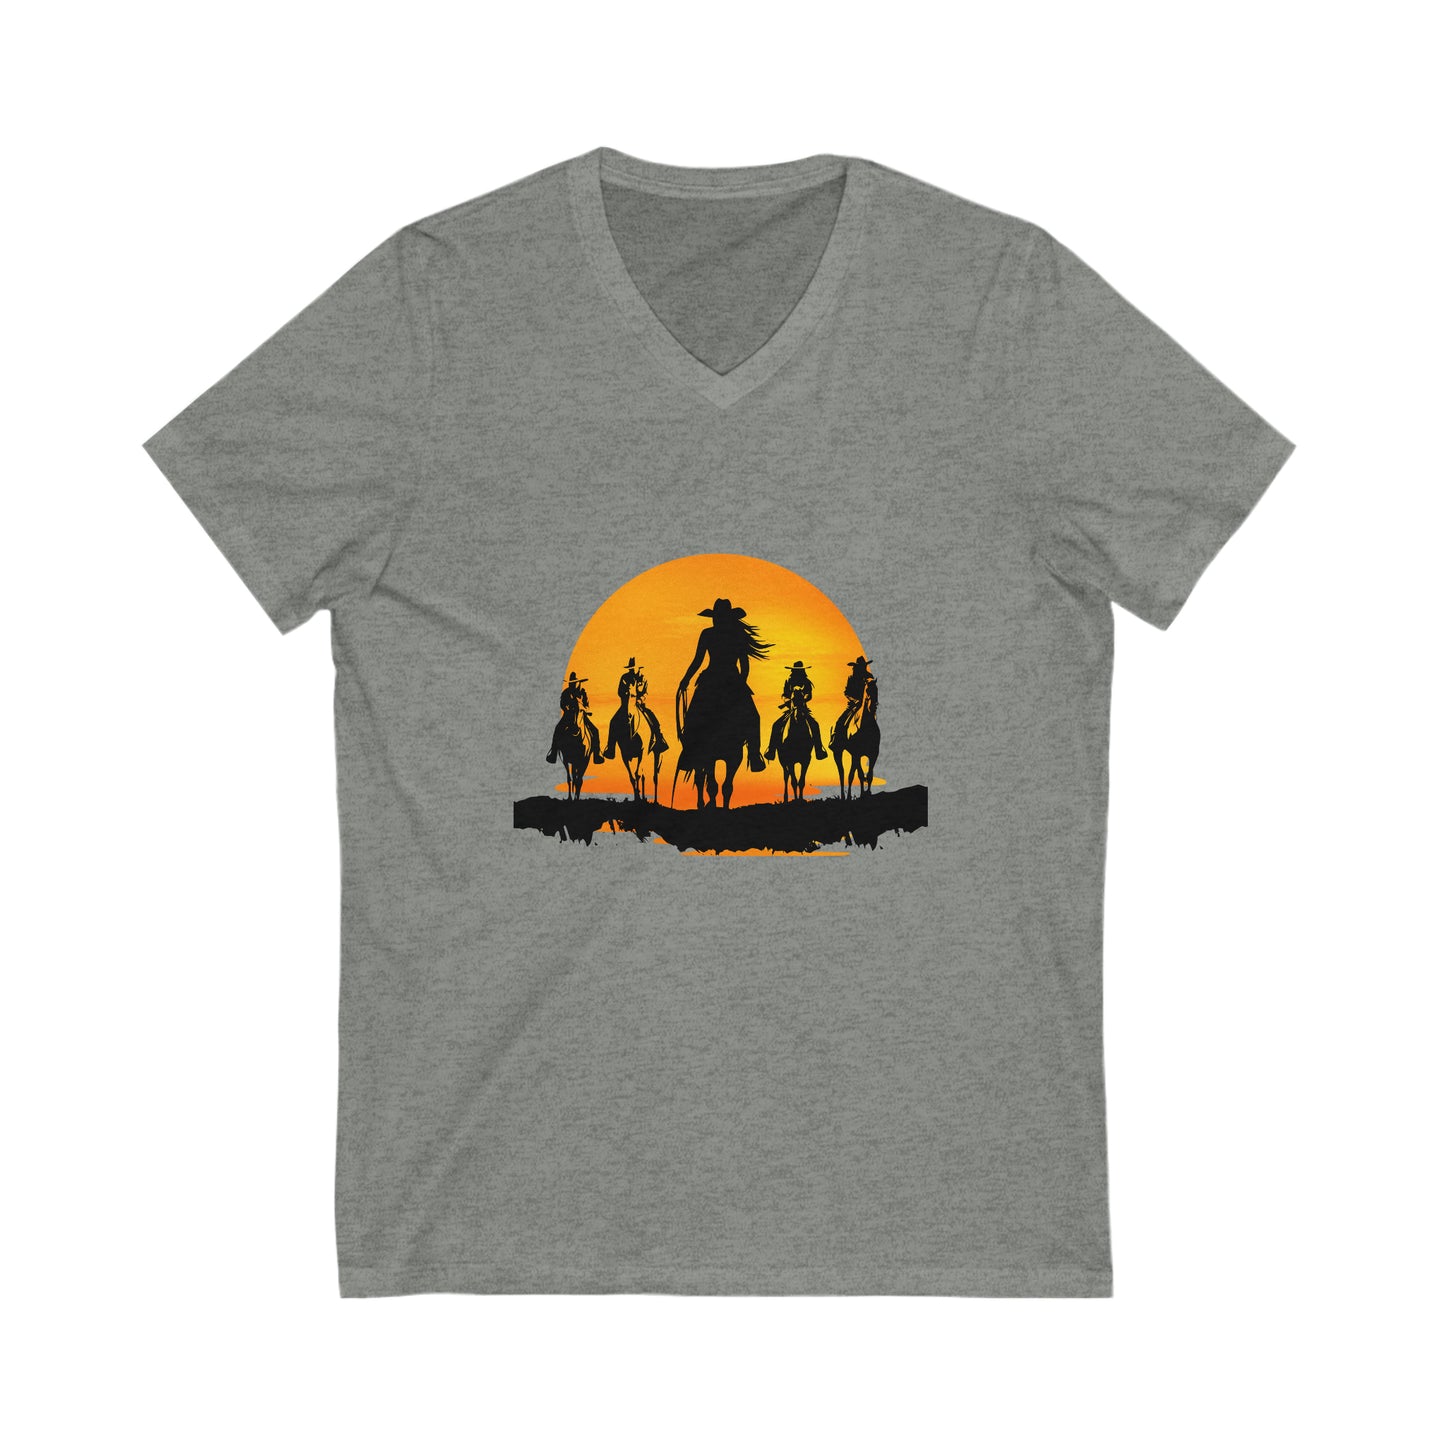 Ladies cowgirls in the sunset - Unisex Jersey Short Sleeve V-Neck Tee